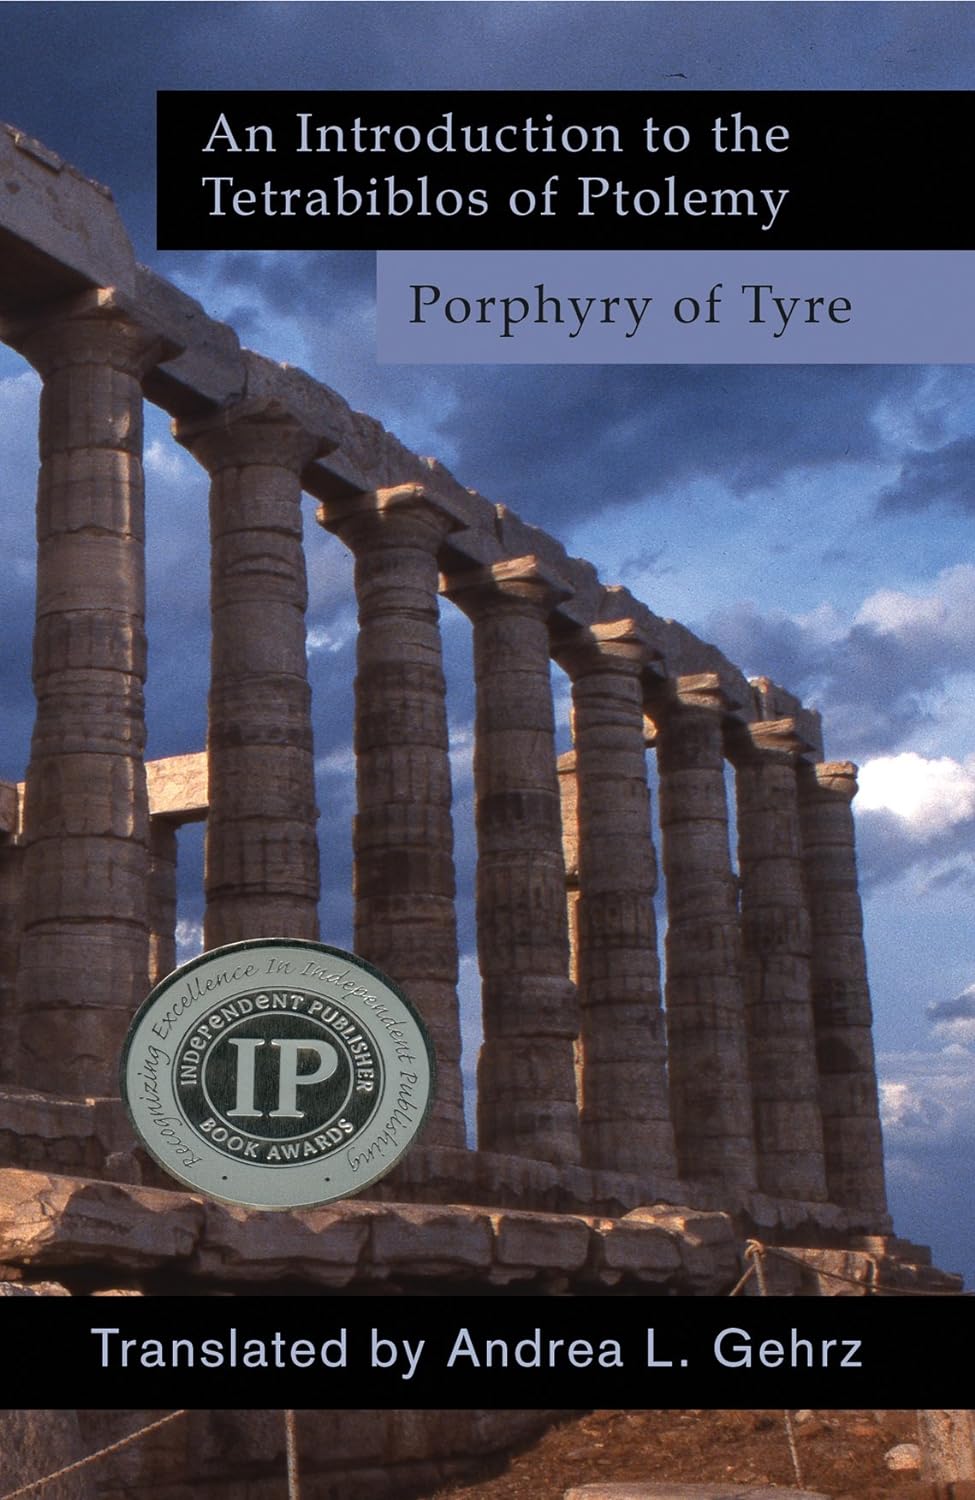 Book Cover: An introduction to the Tetrabiblos of Ptolemy by Porphyry of Tyre